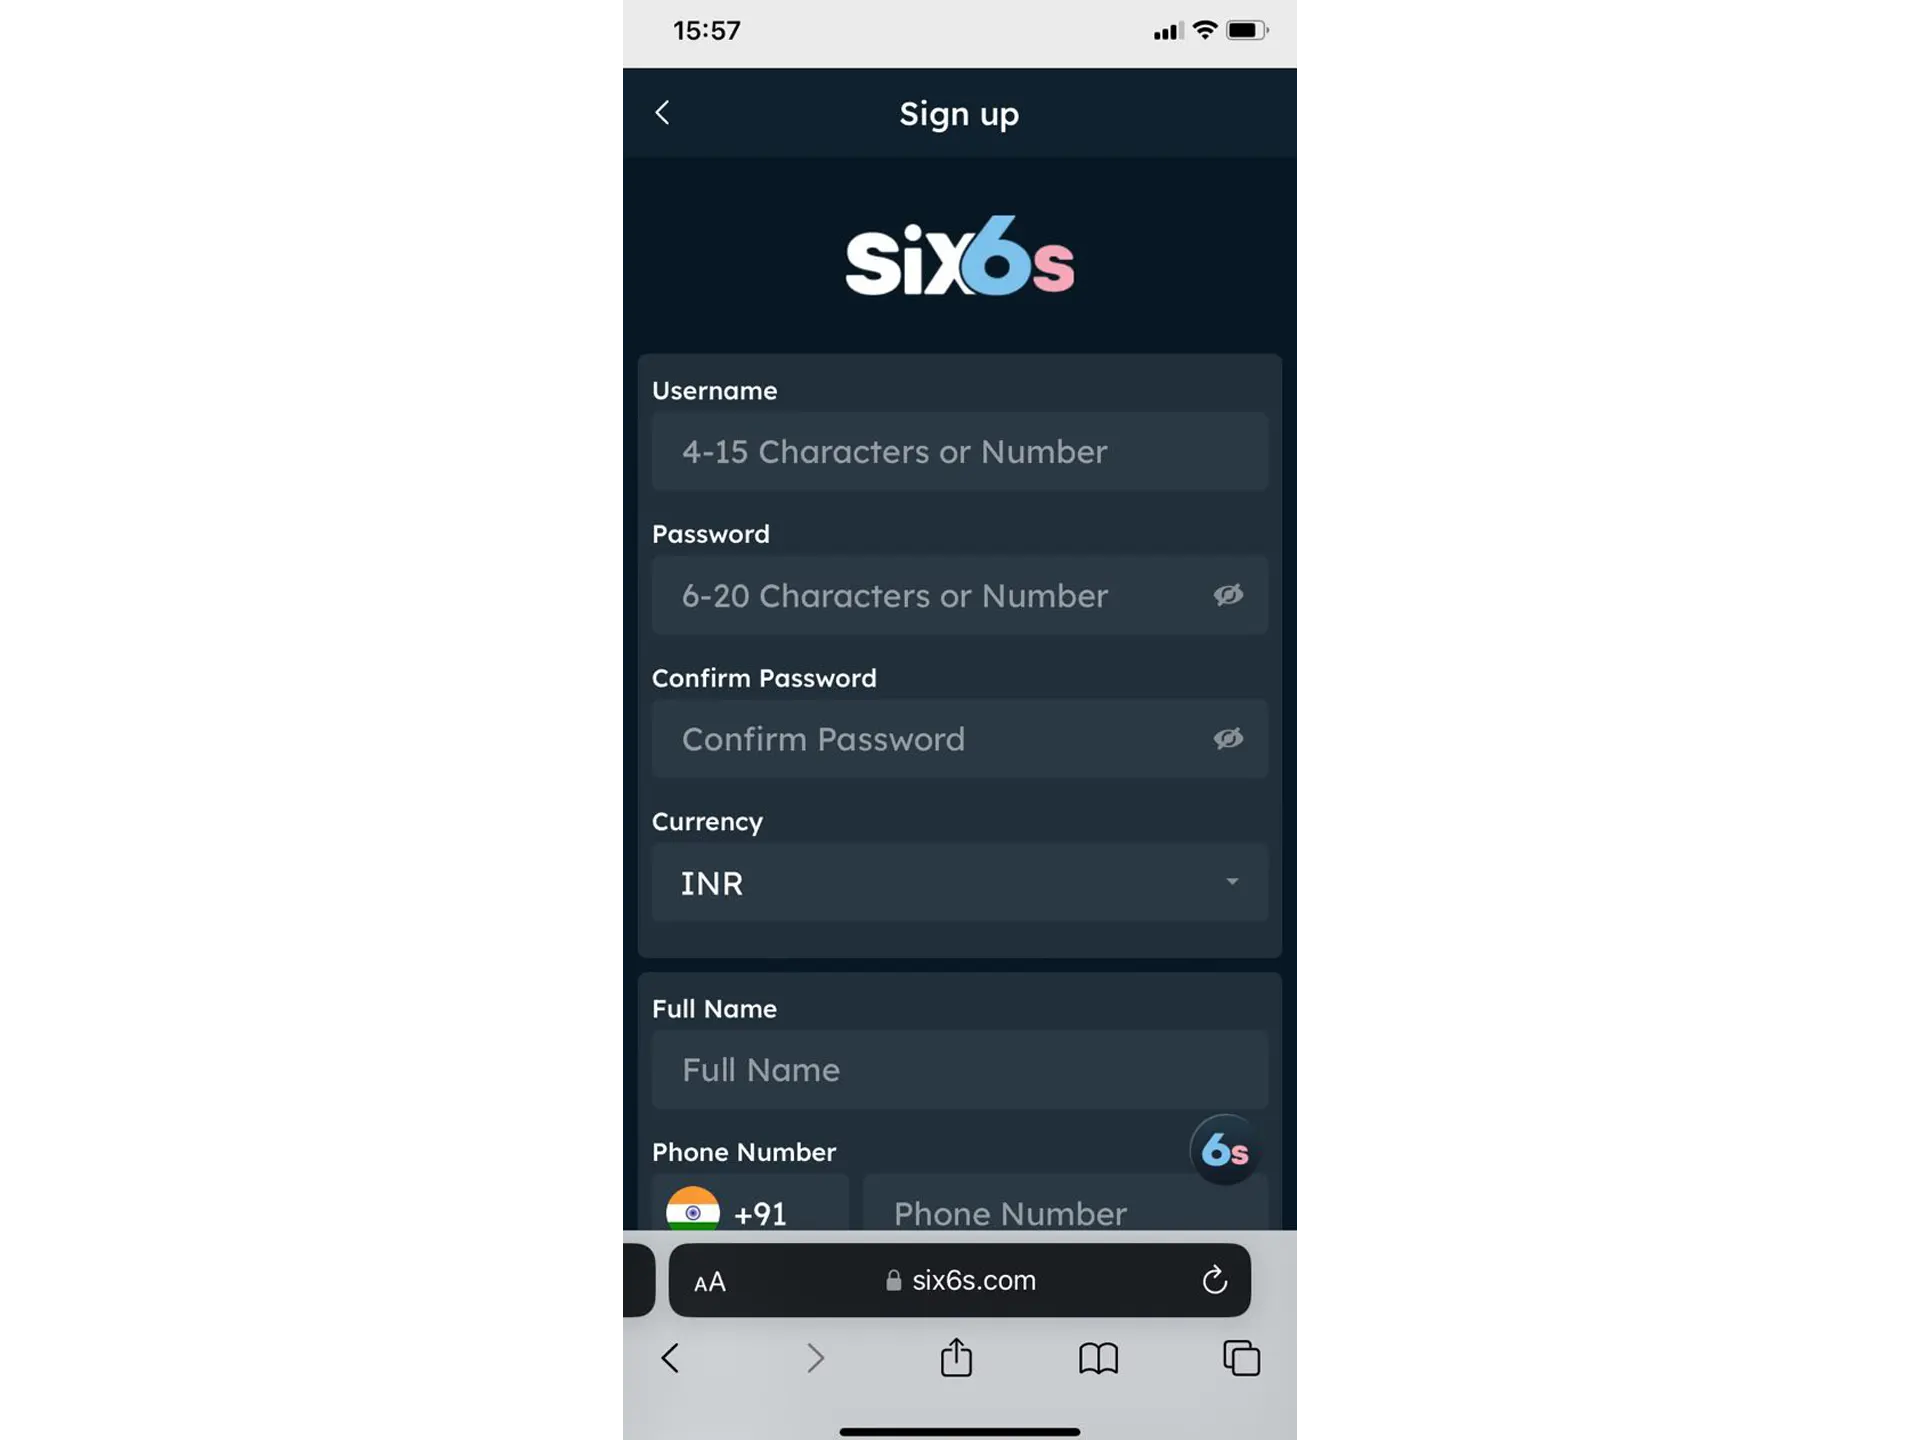 Sign up on the Six6s app and get bonuses.